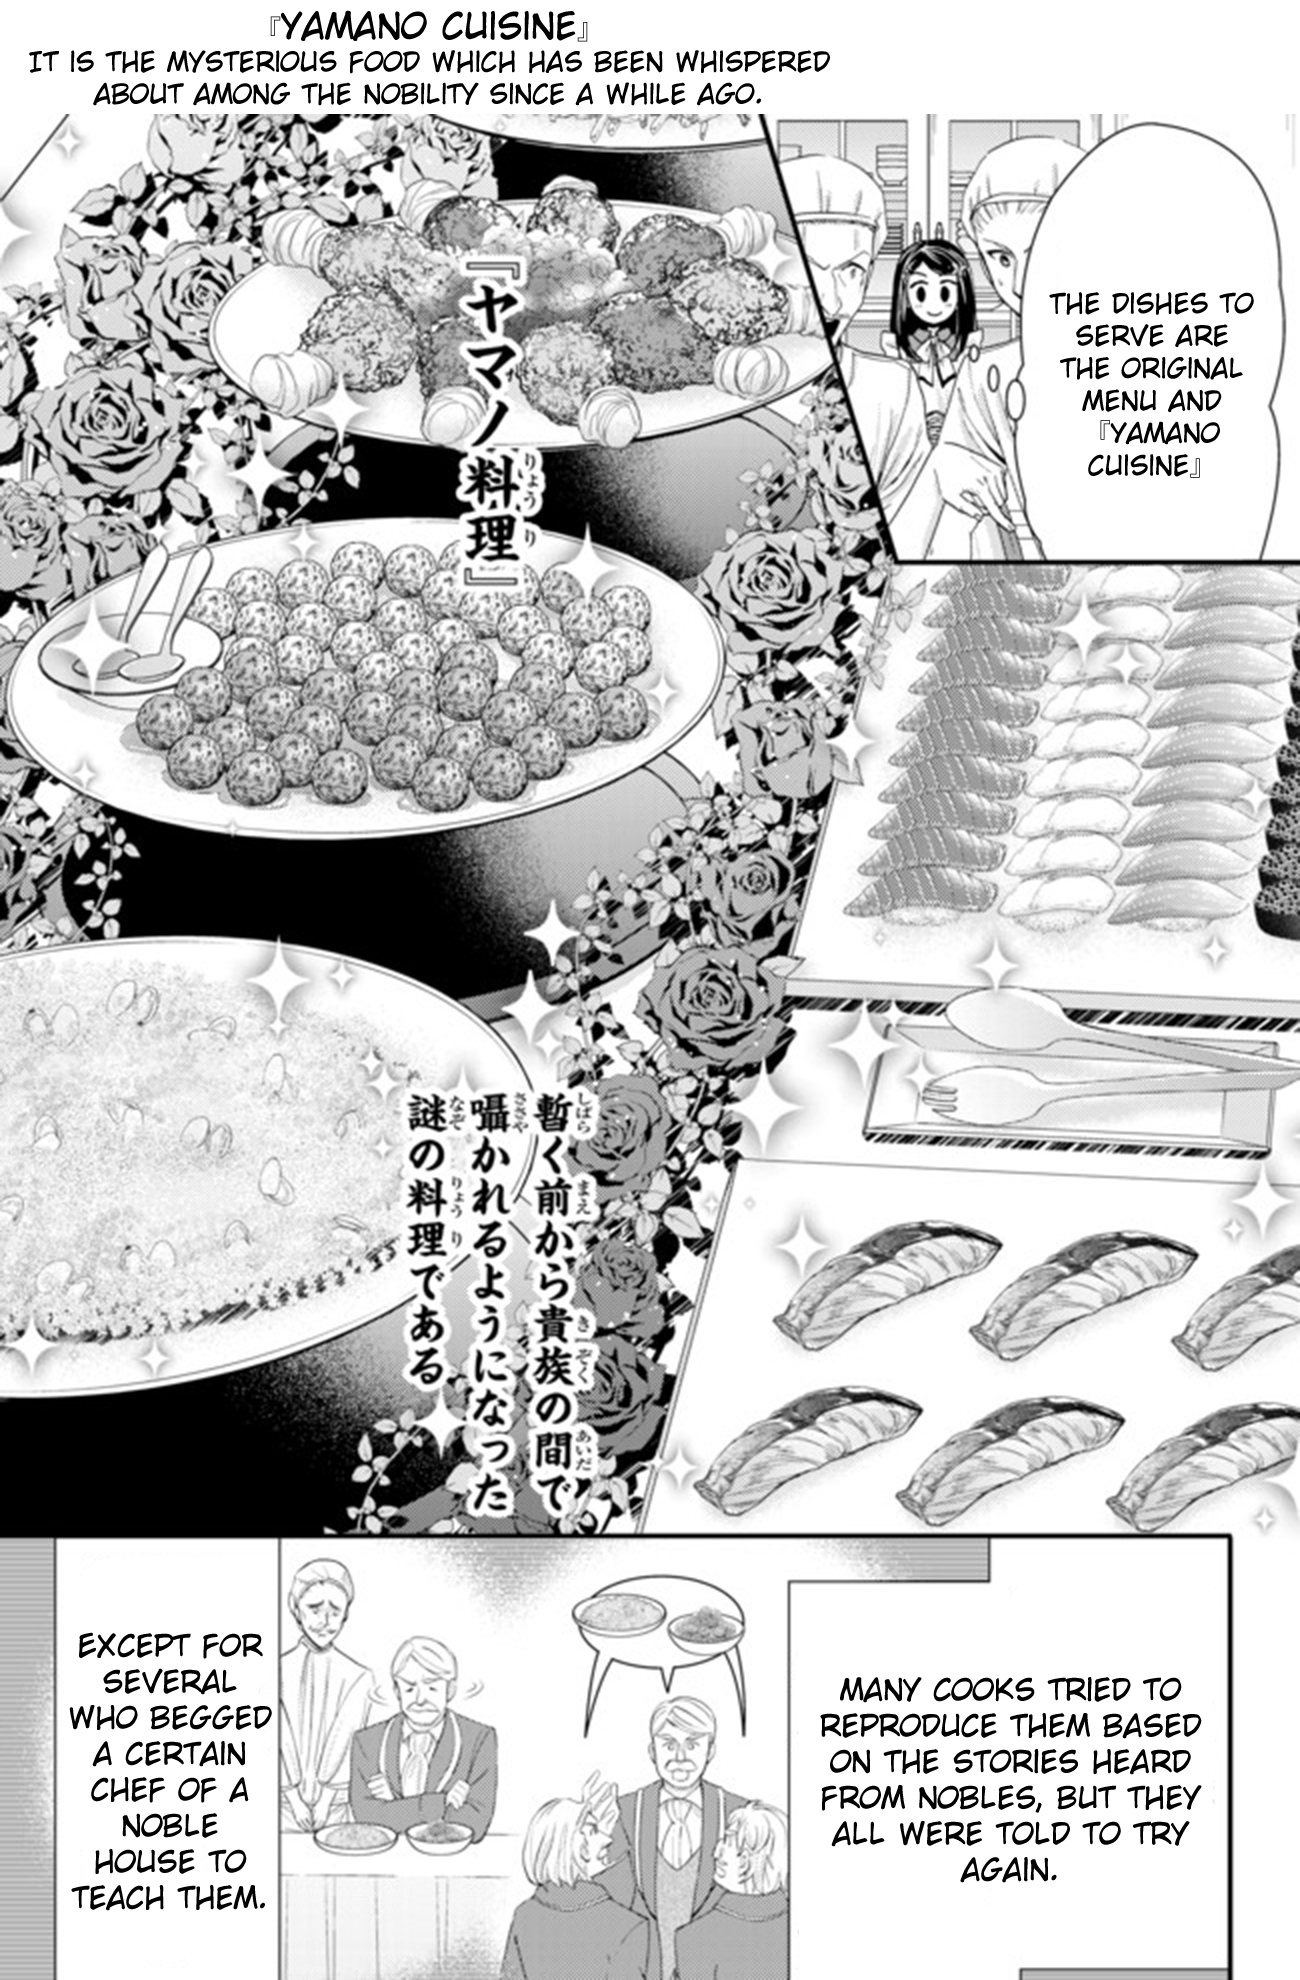 Saving 80,000 Gold Coins in the Different World for My Old Age Ch. 26.1 Yamano Cuisine